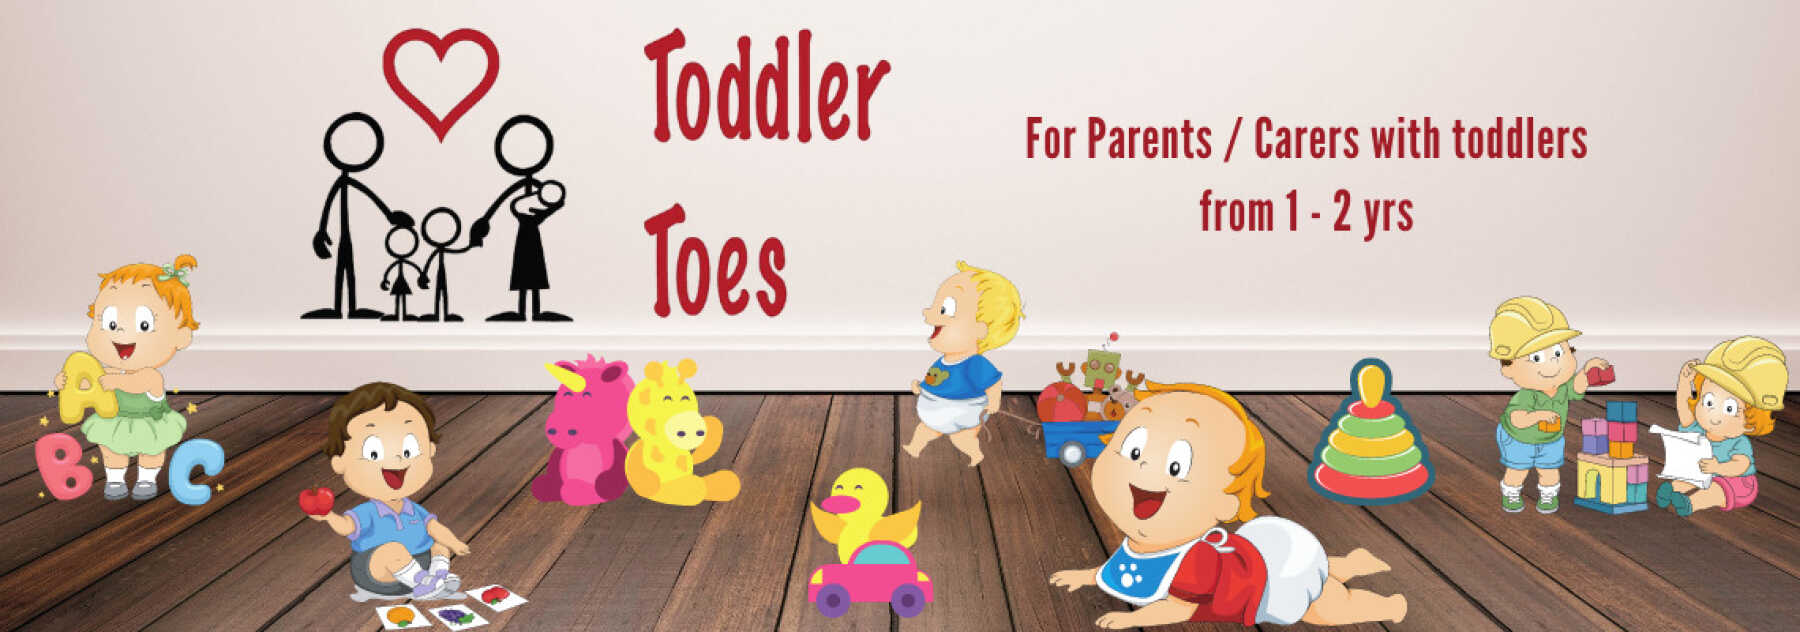 Featured Image for Toddler Toes